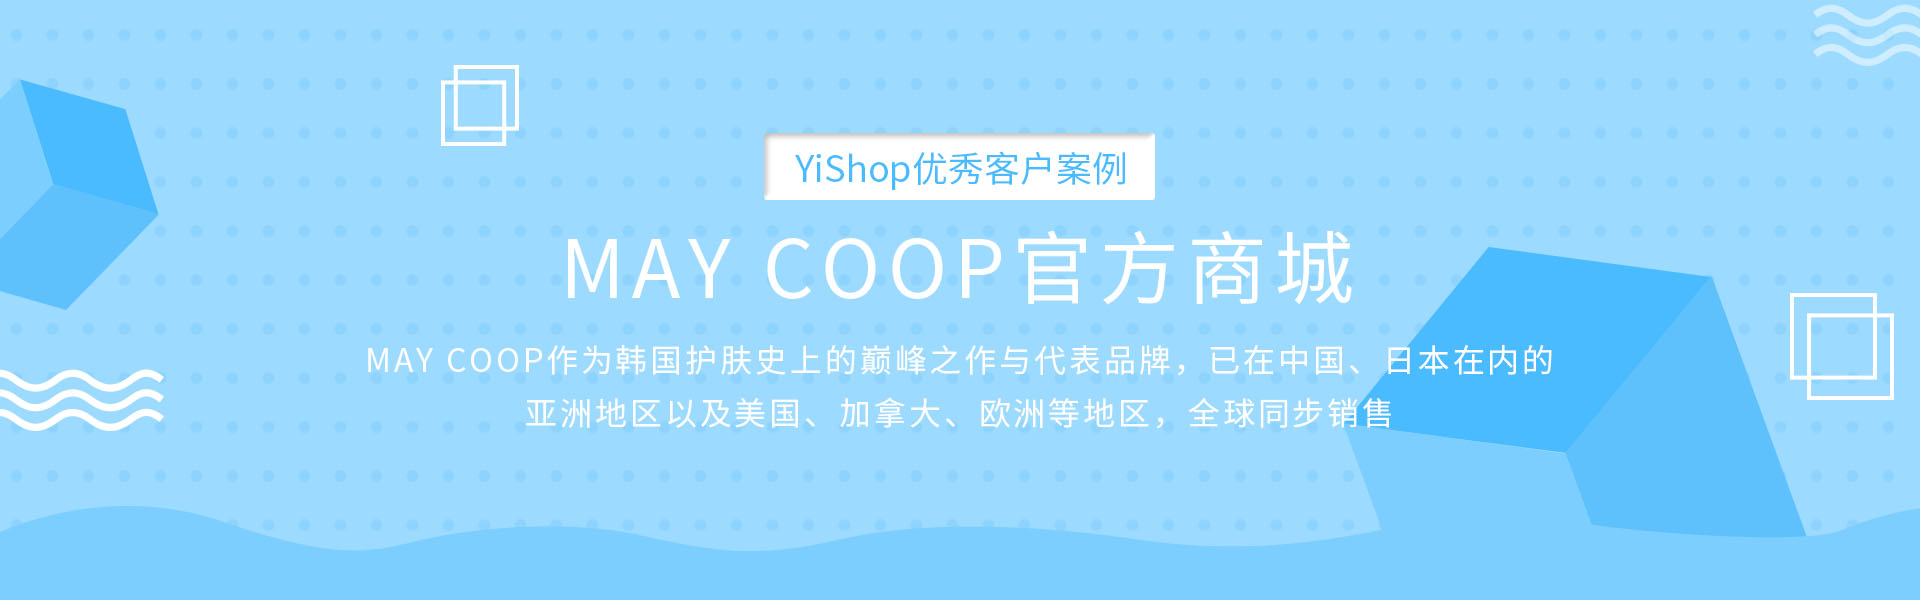 MAY COOP的Banner图